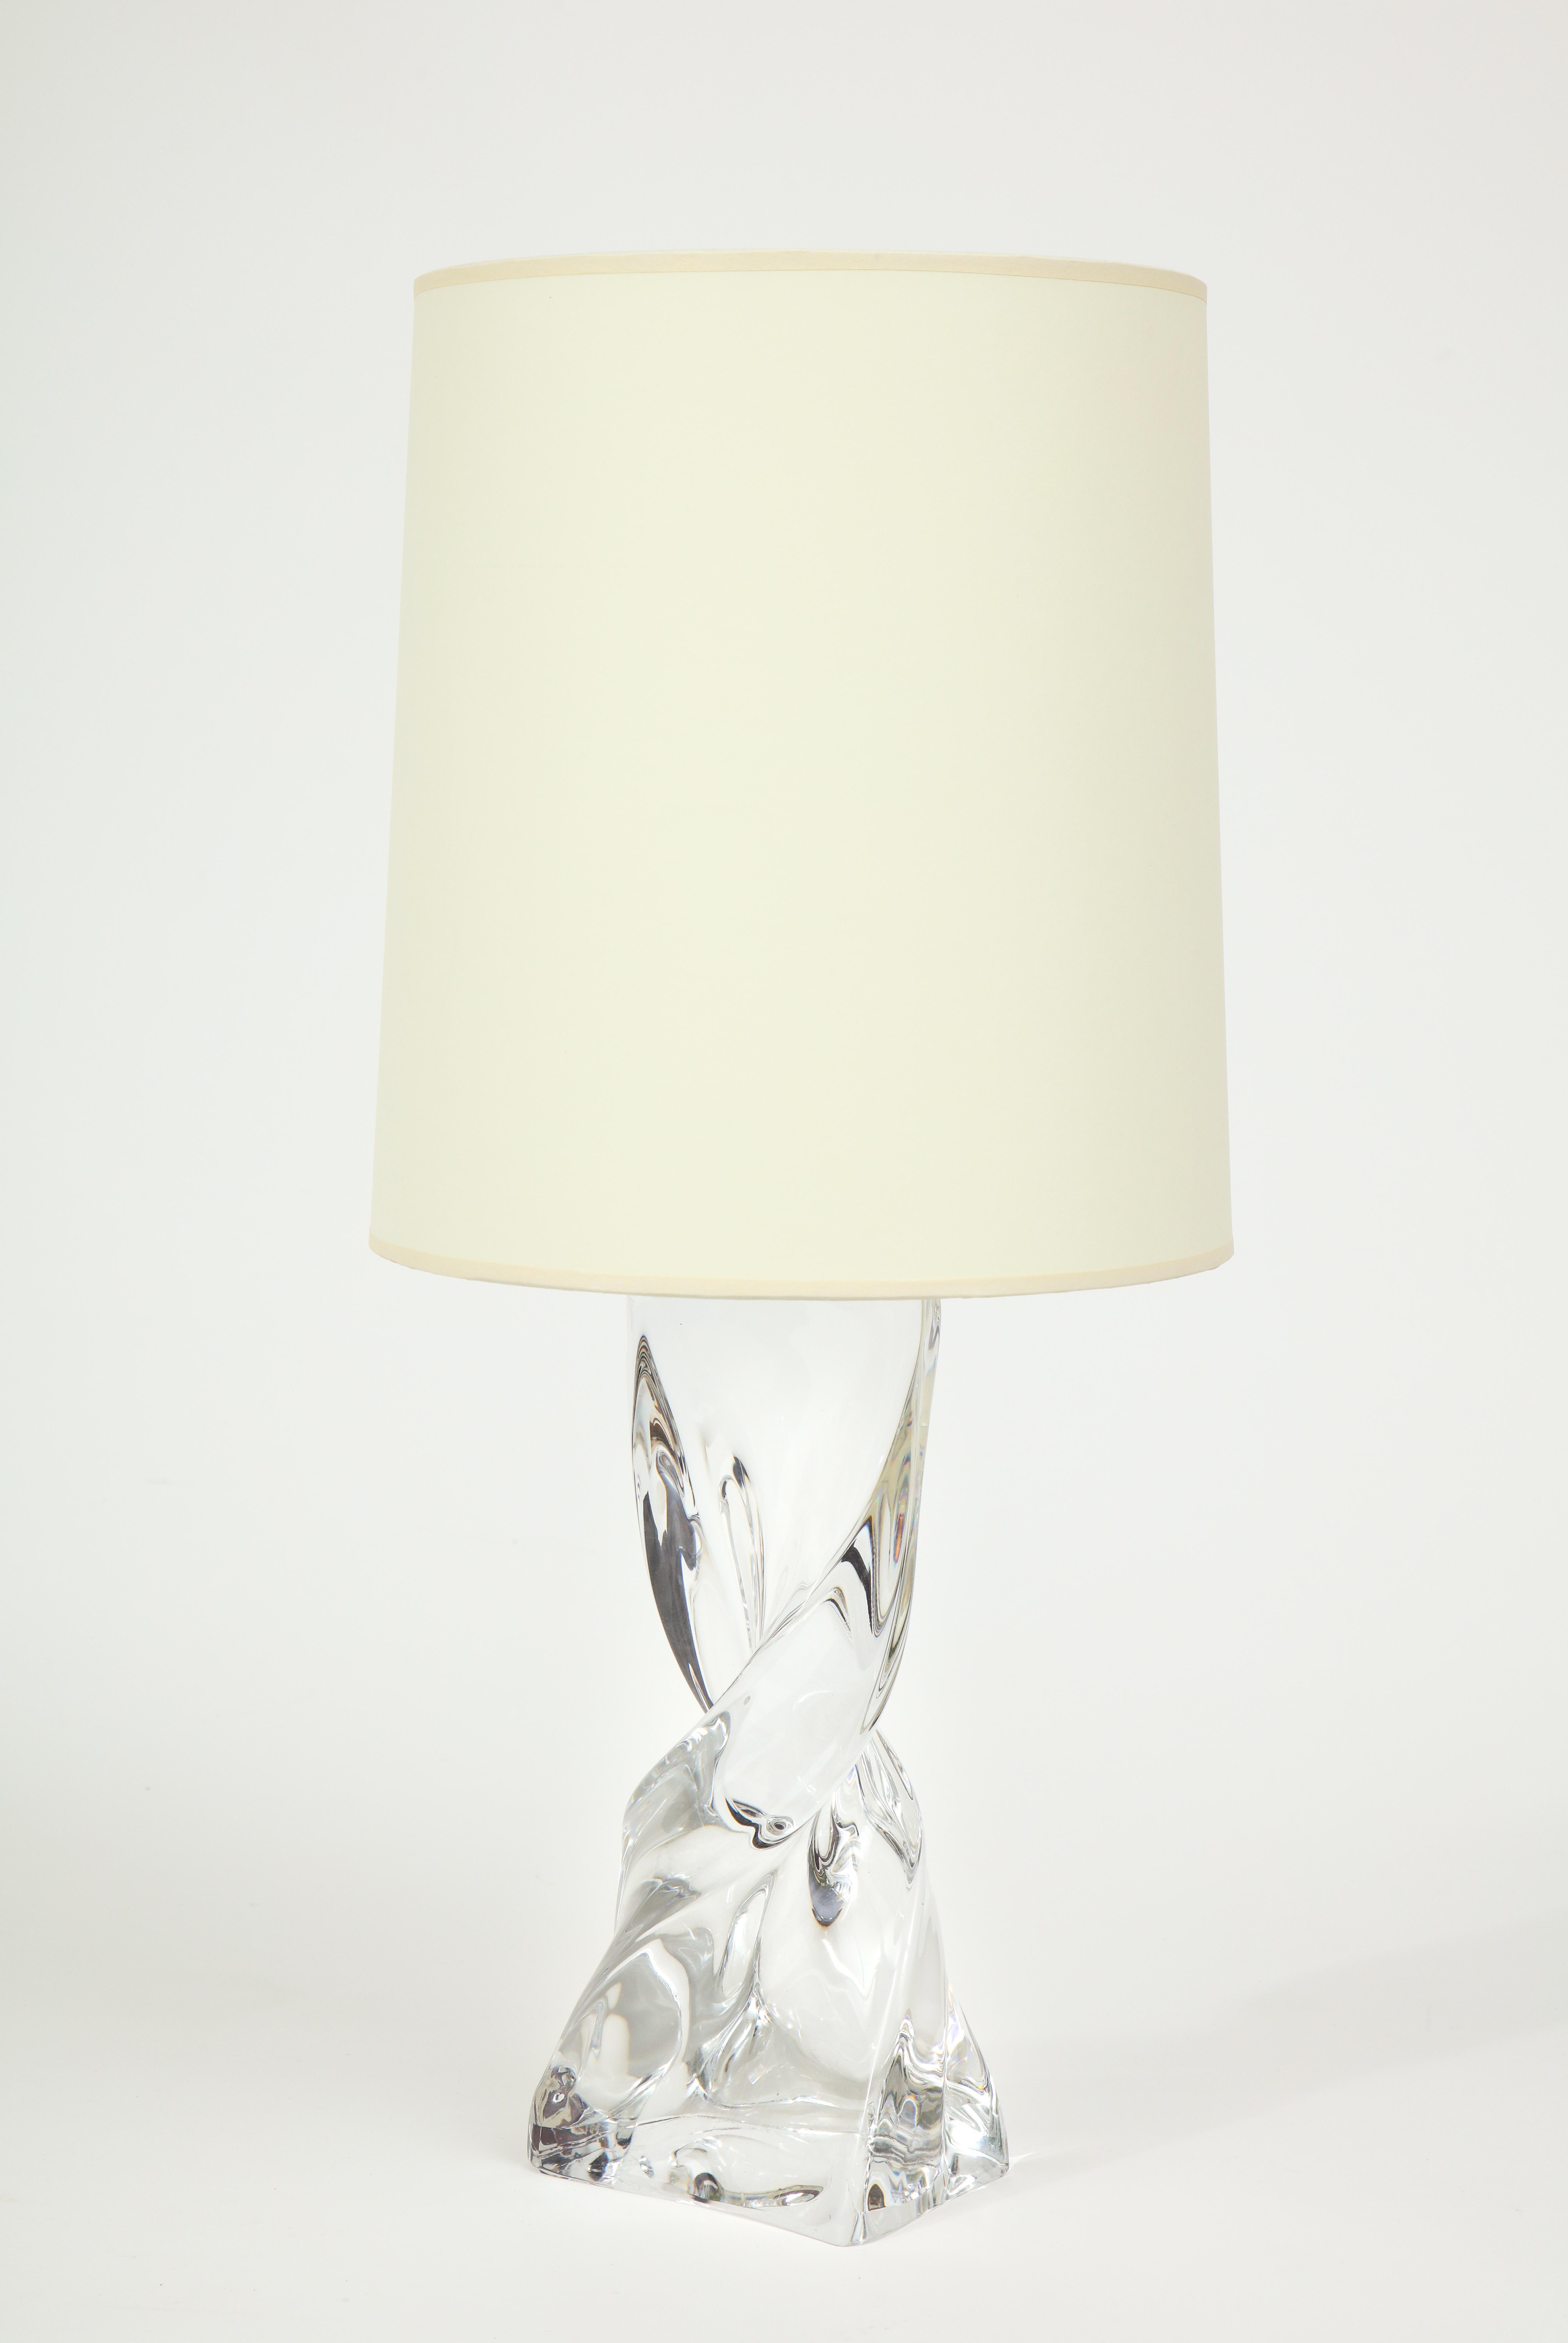 Baccarat crystal table lamp

Beautiful Baccarat crystal lamp. This is a heavy piece and exceptional in it's workmanship. Imported from France. Believed to have been made in the 1980s. Shade not included
Lamp is 10 inches to top of crystal and 20